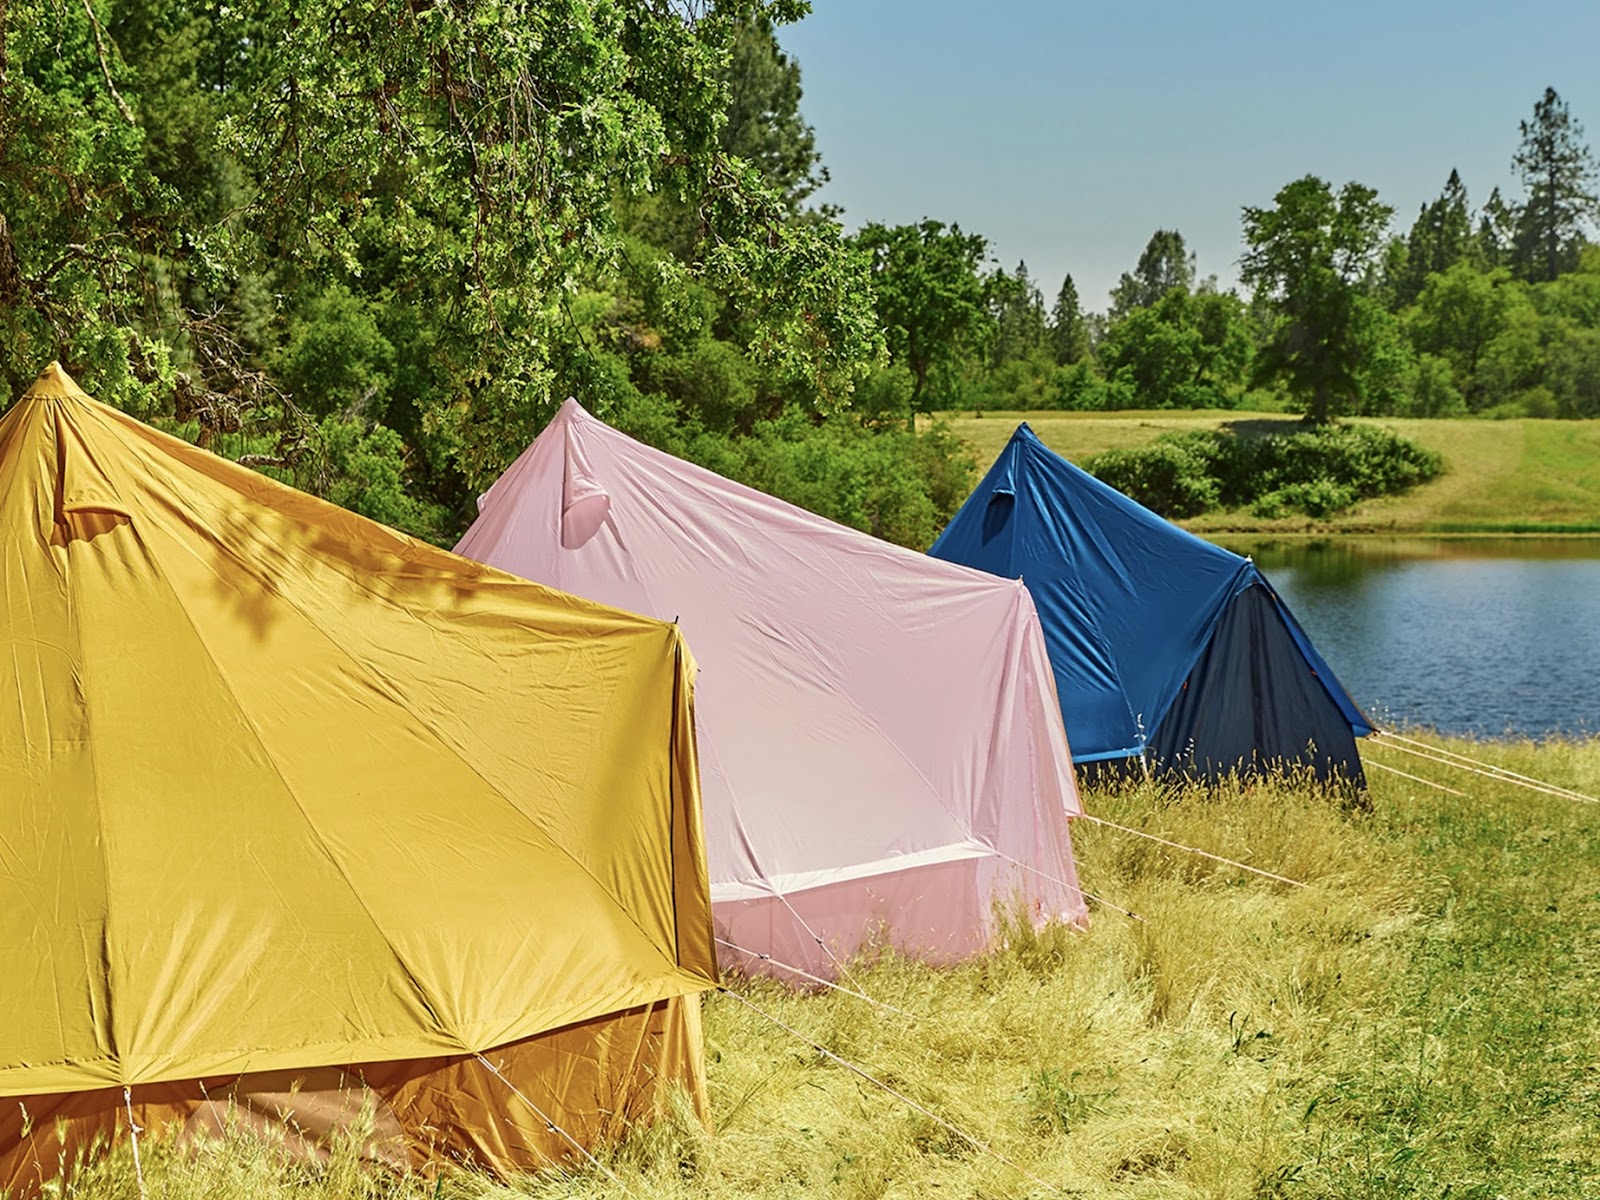 The Get Out tents